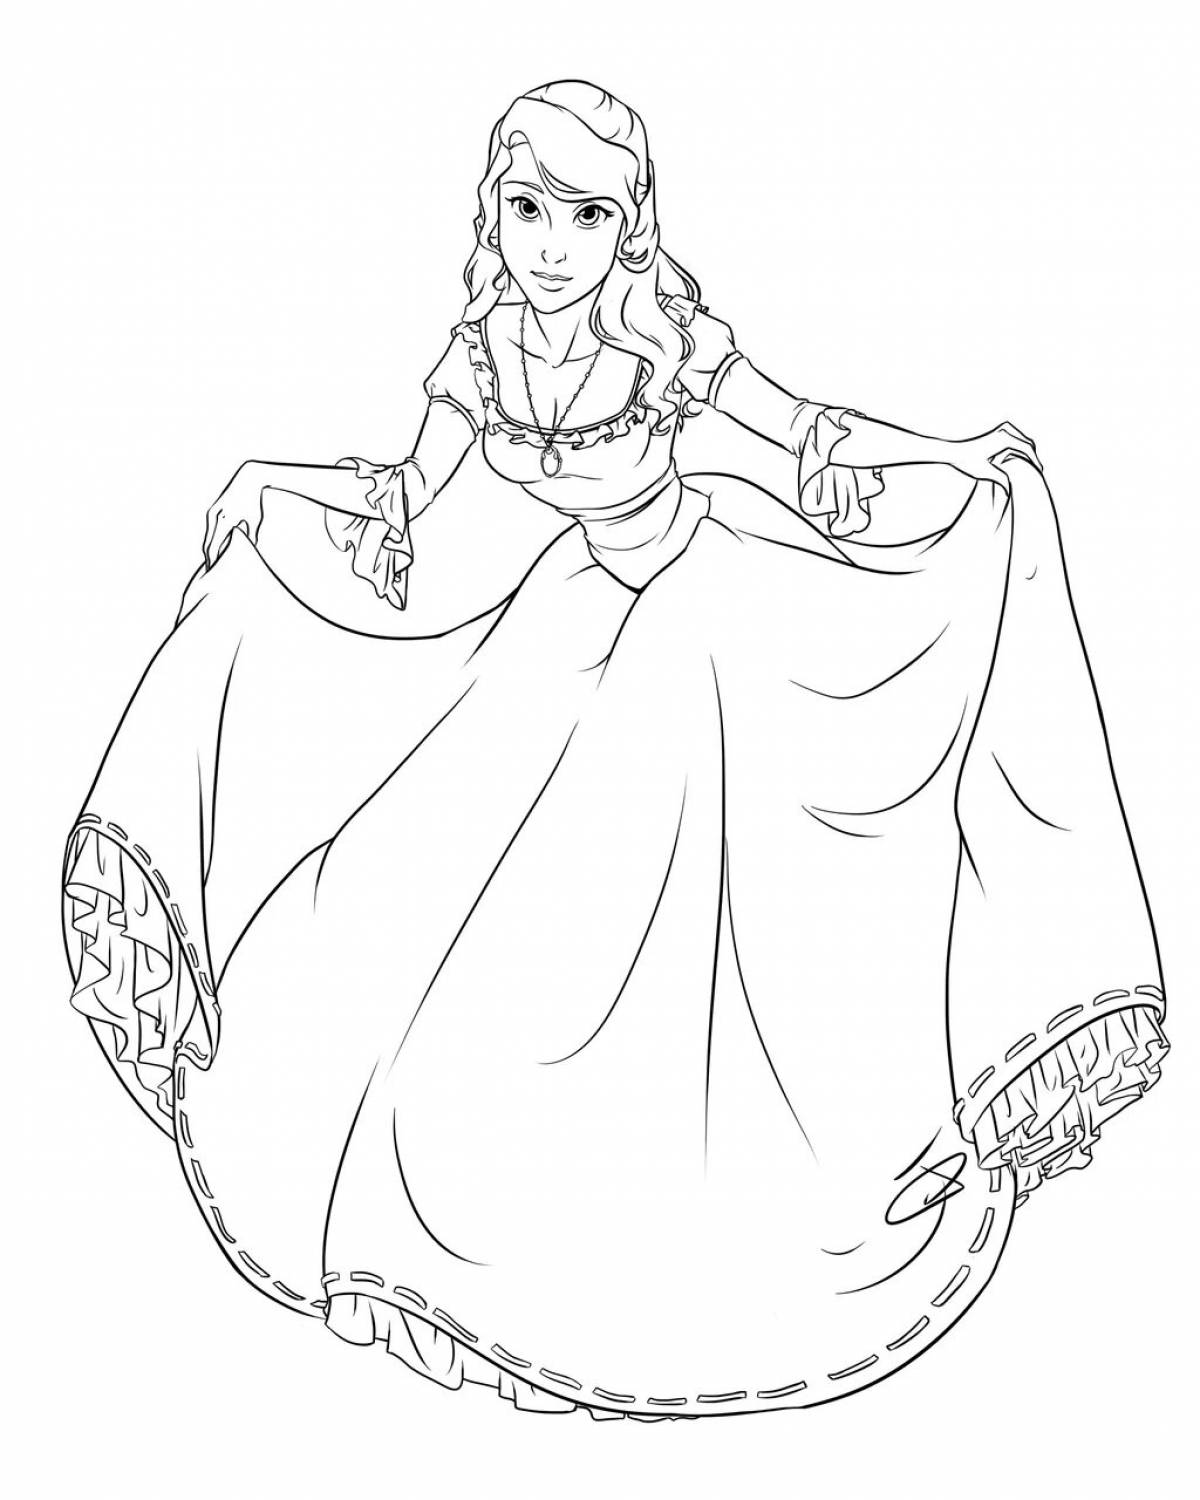 Sissy princess live coloring page